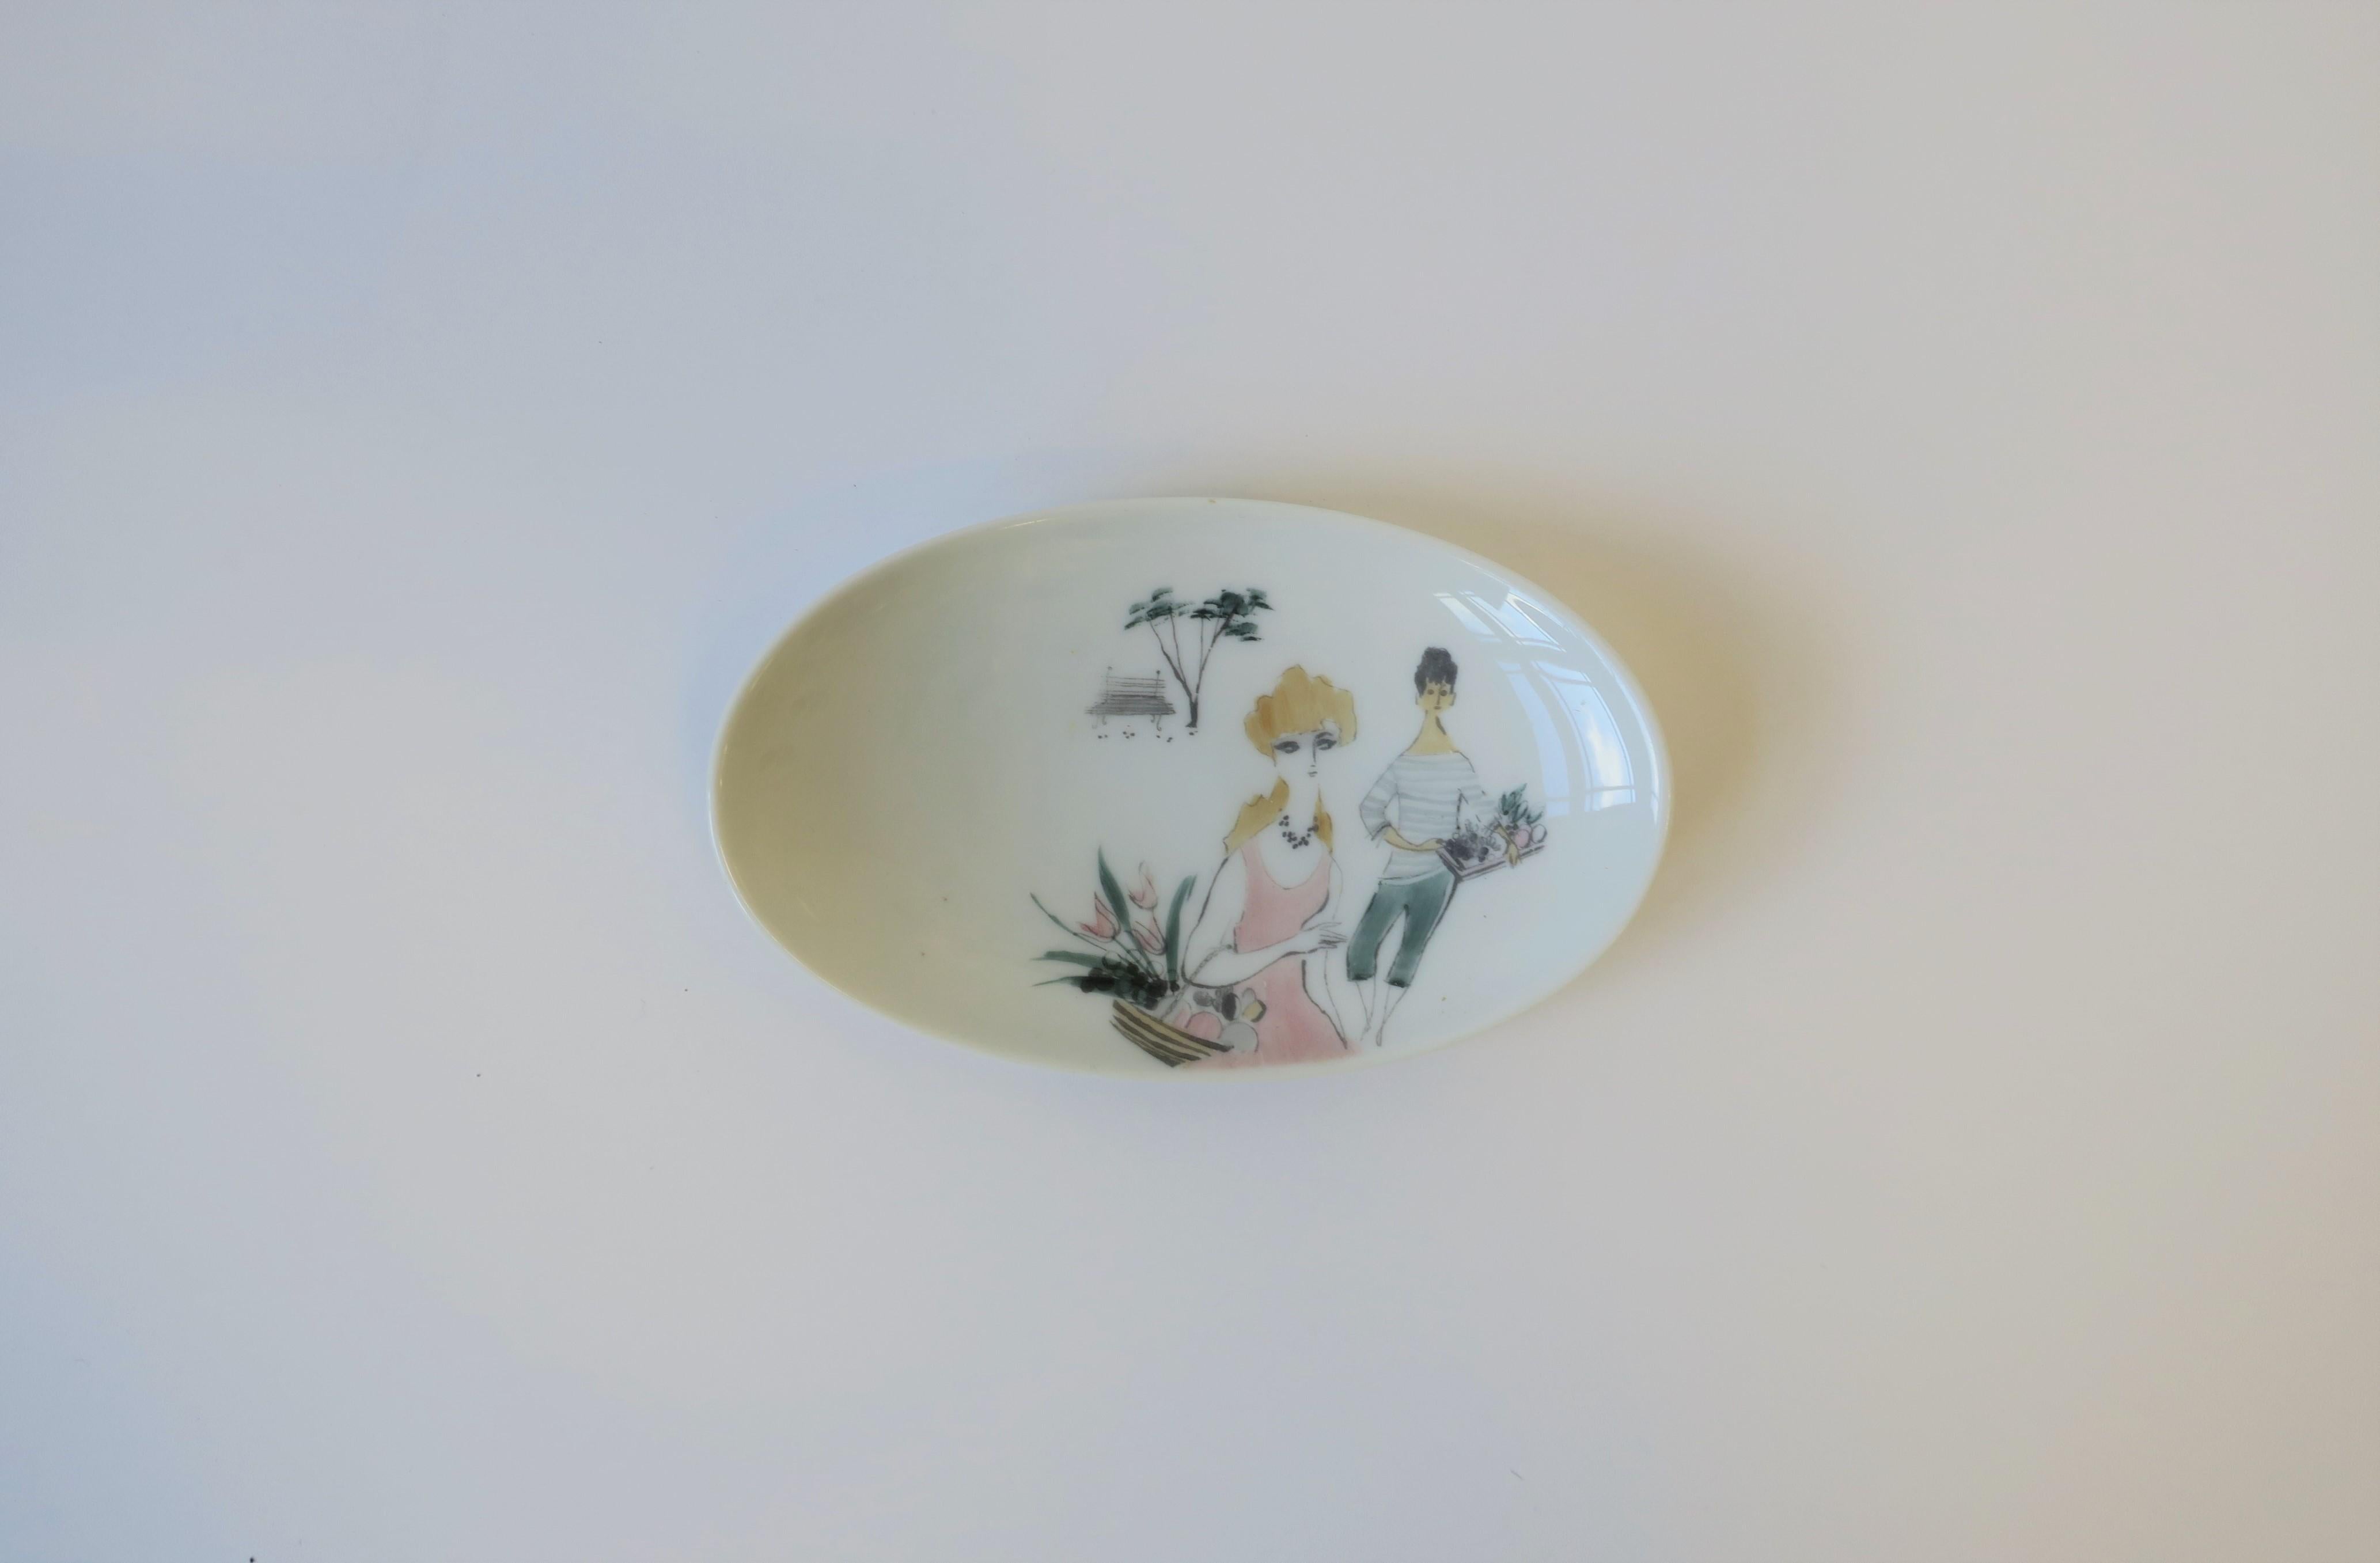 A beautiful German oval white porcelain jewelry dish with female(s) figurative design, 'Rendezvous', by Rosenthal, circa 20th century, Germany. Dish features hand painted female figures holding baskets filled with flowers and fruit in soft pastel